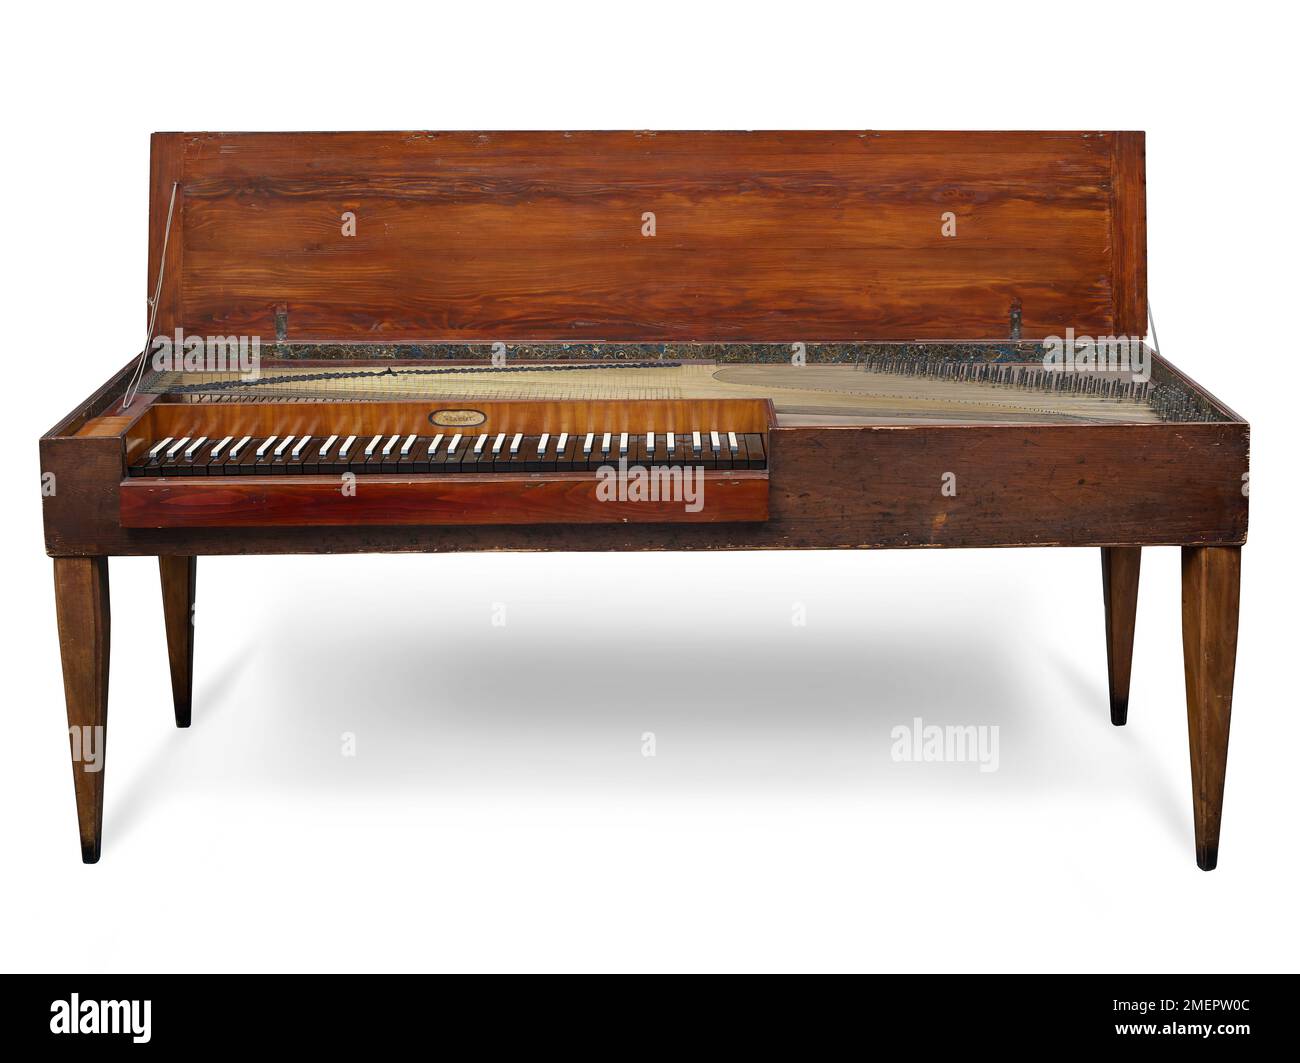 Large unfretted clavichord, attributed to Georg Nikolas (or Nikolaus) Deckert, Thuringia, Germany, 1810 Stock Photo